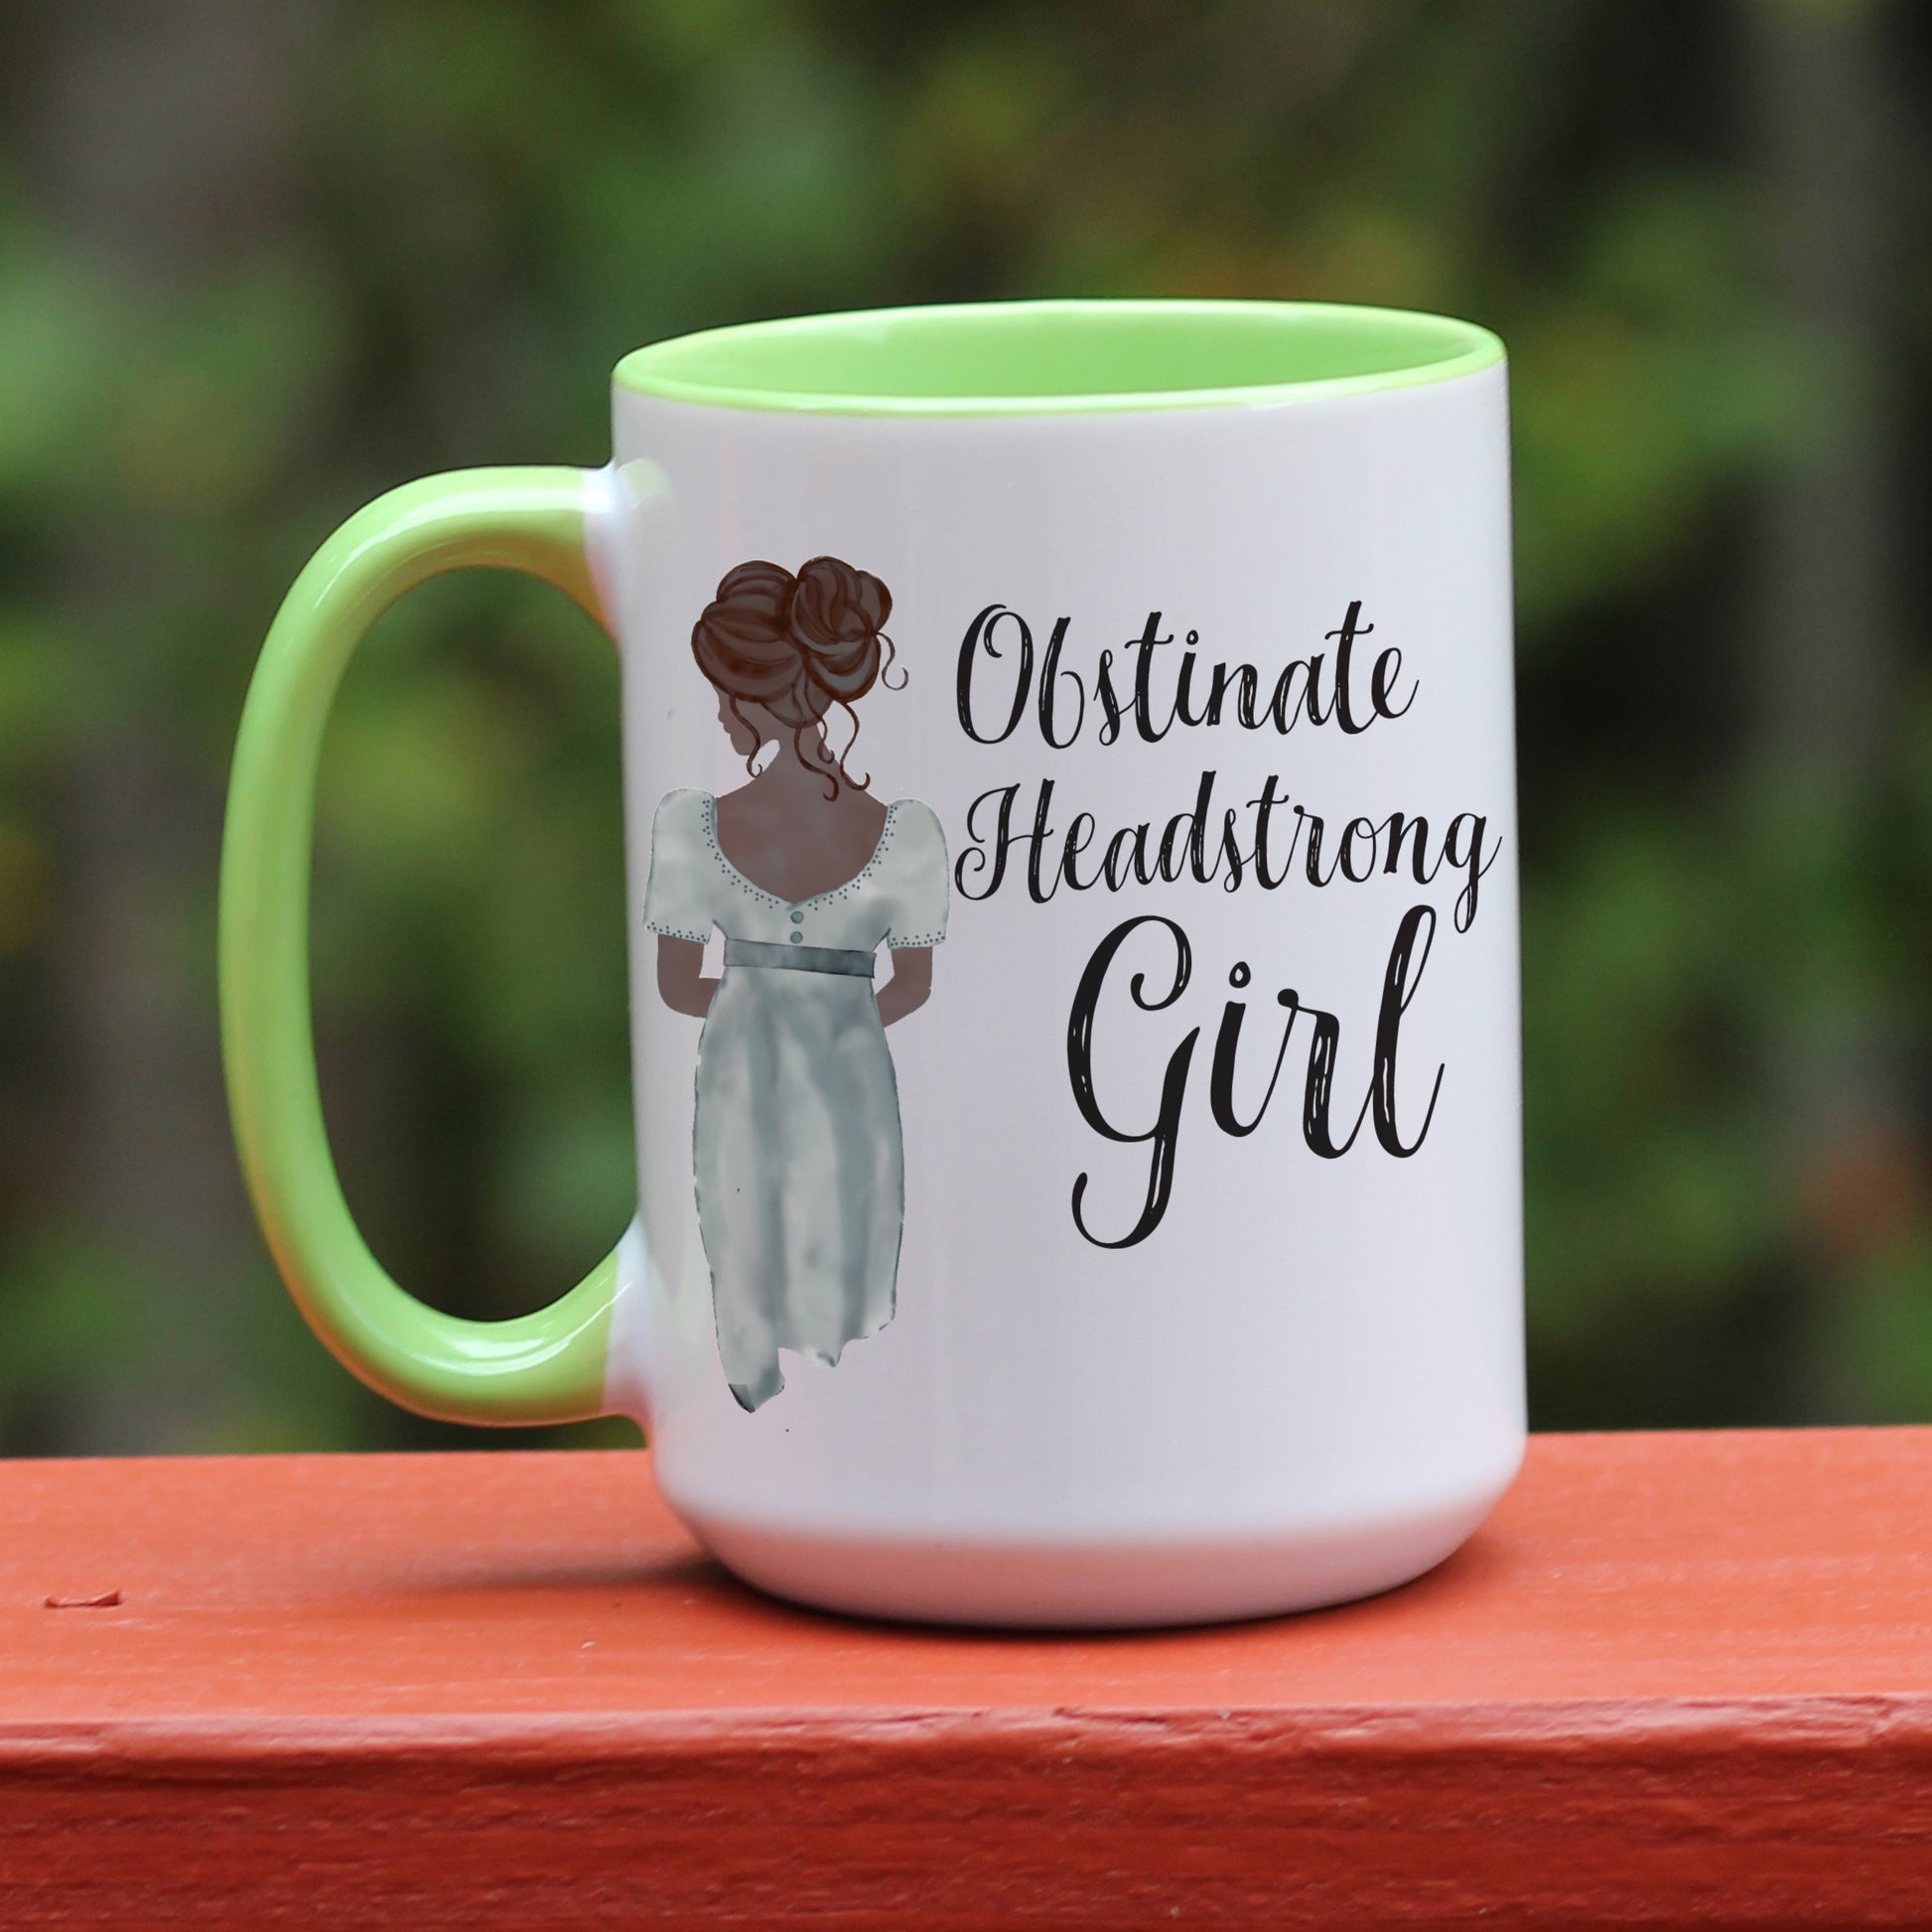 Jane Austen Pride and Prejudice Obstinate Headstrong Girl quote white coffee mug with green handle.